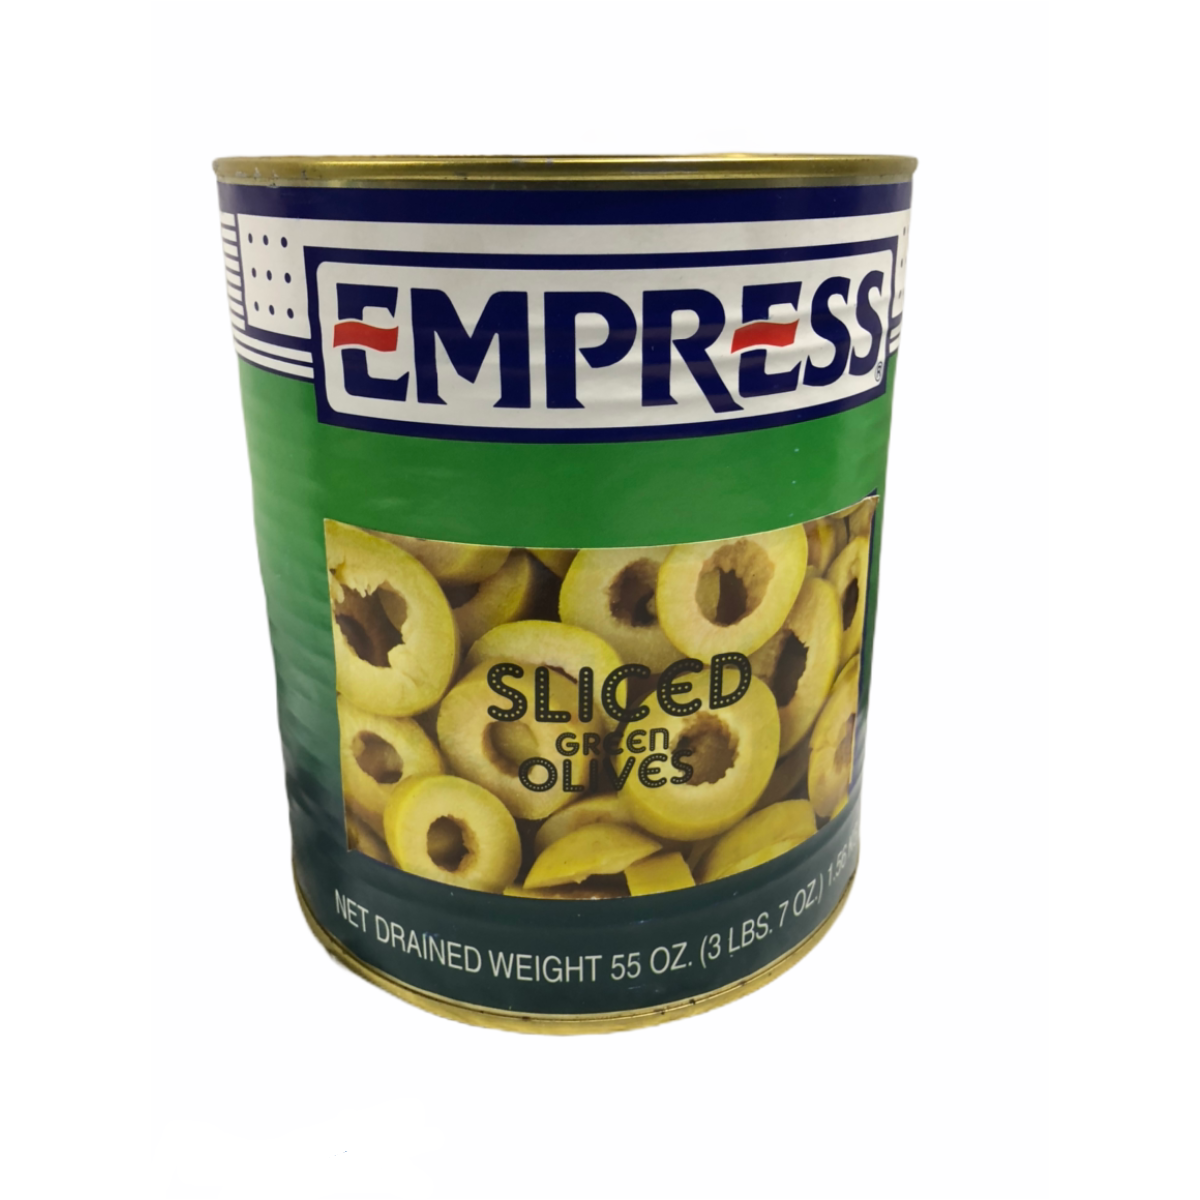 EMPRESS SLICED GREEN OLIVES WITH PEMINTO GAL